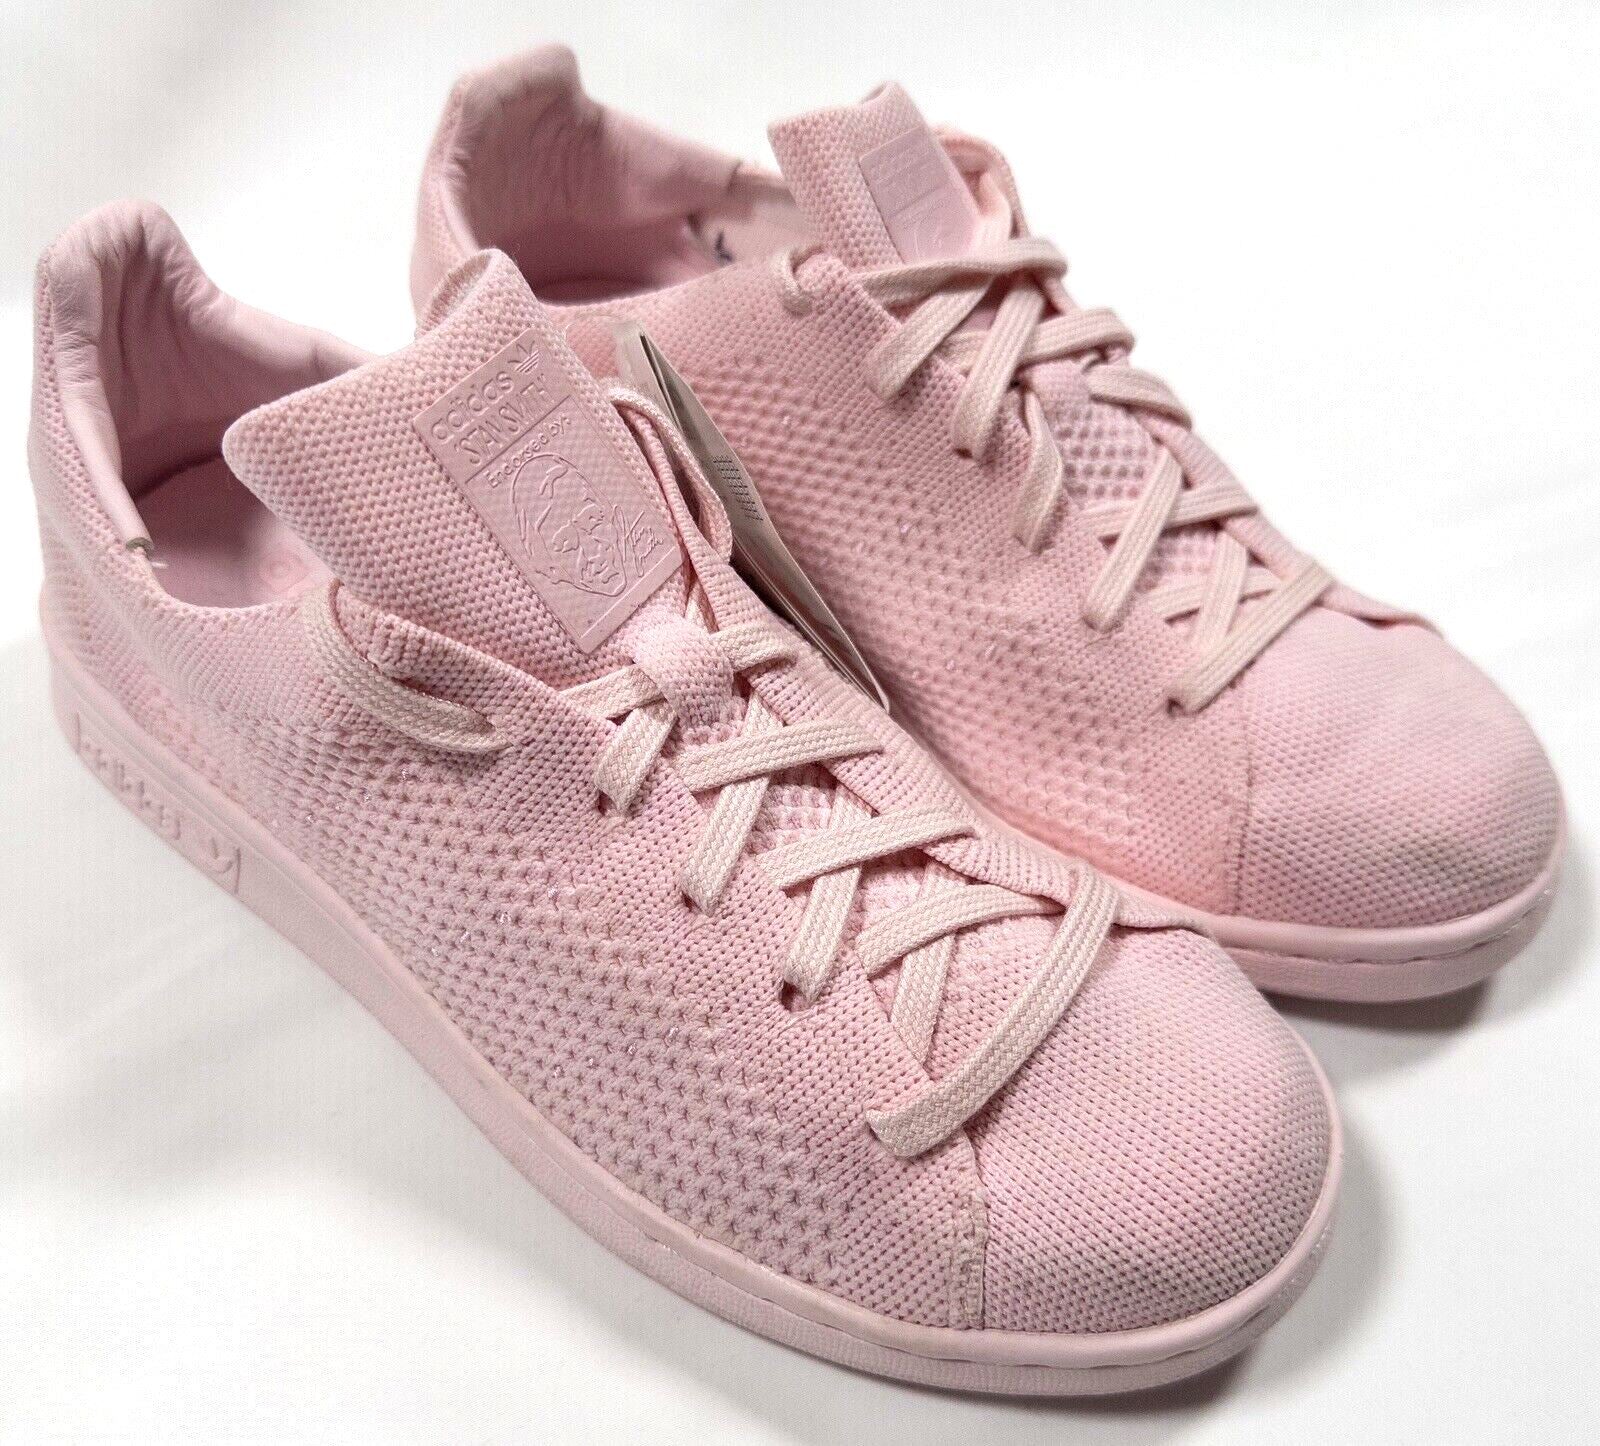 Limited Edition Adidas Stan Smith Pink Women Trainer Shoe Size UK 6